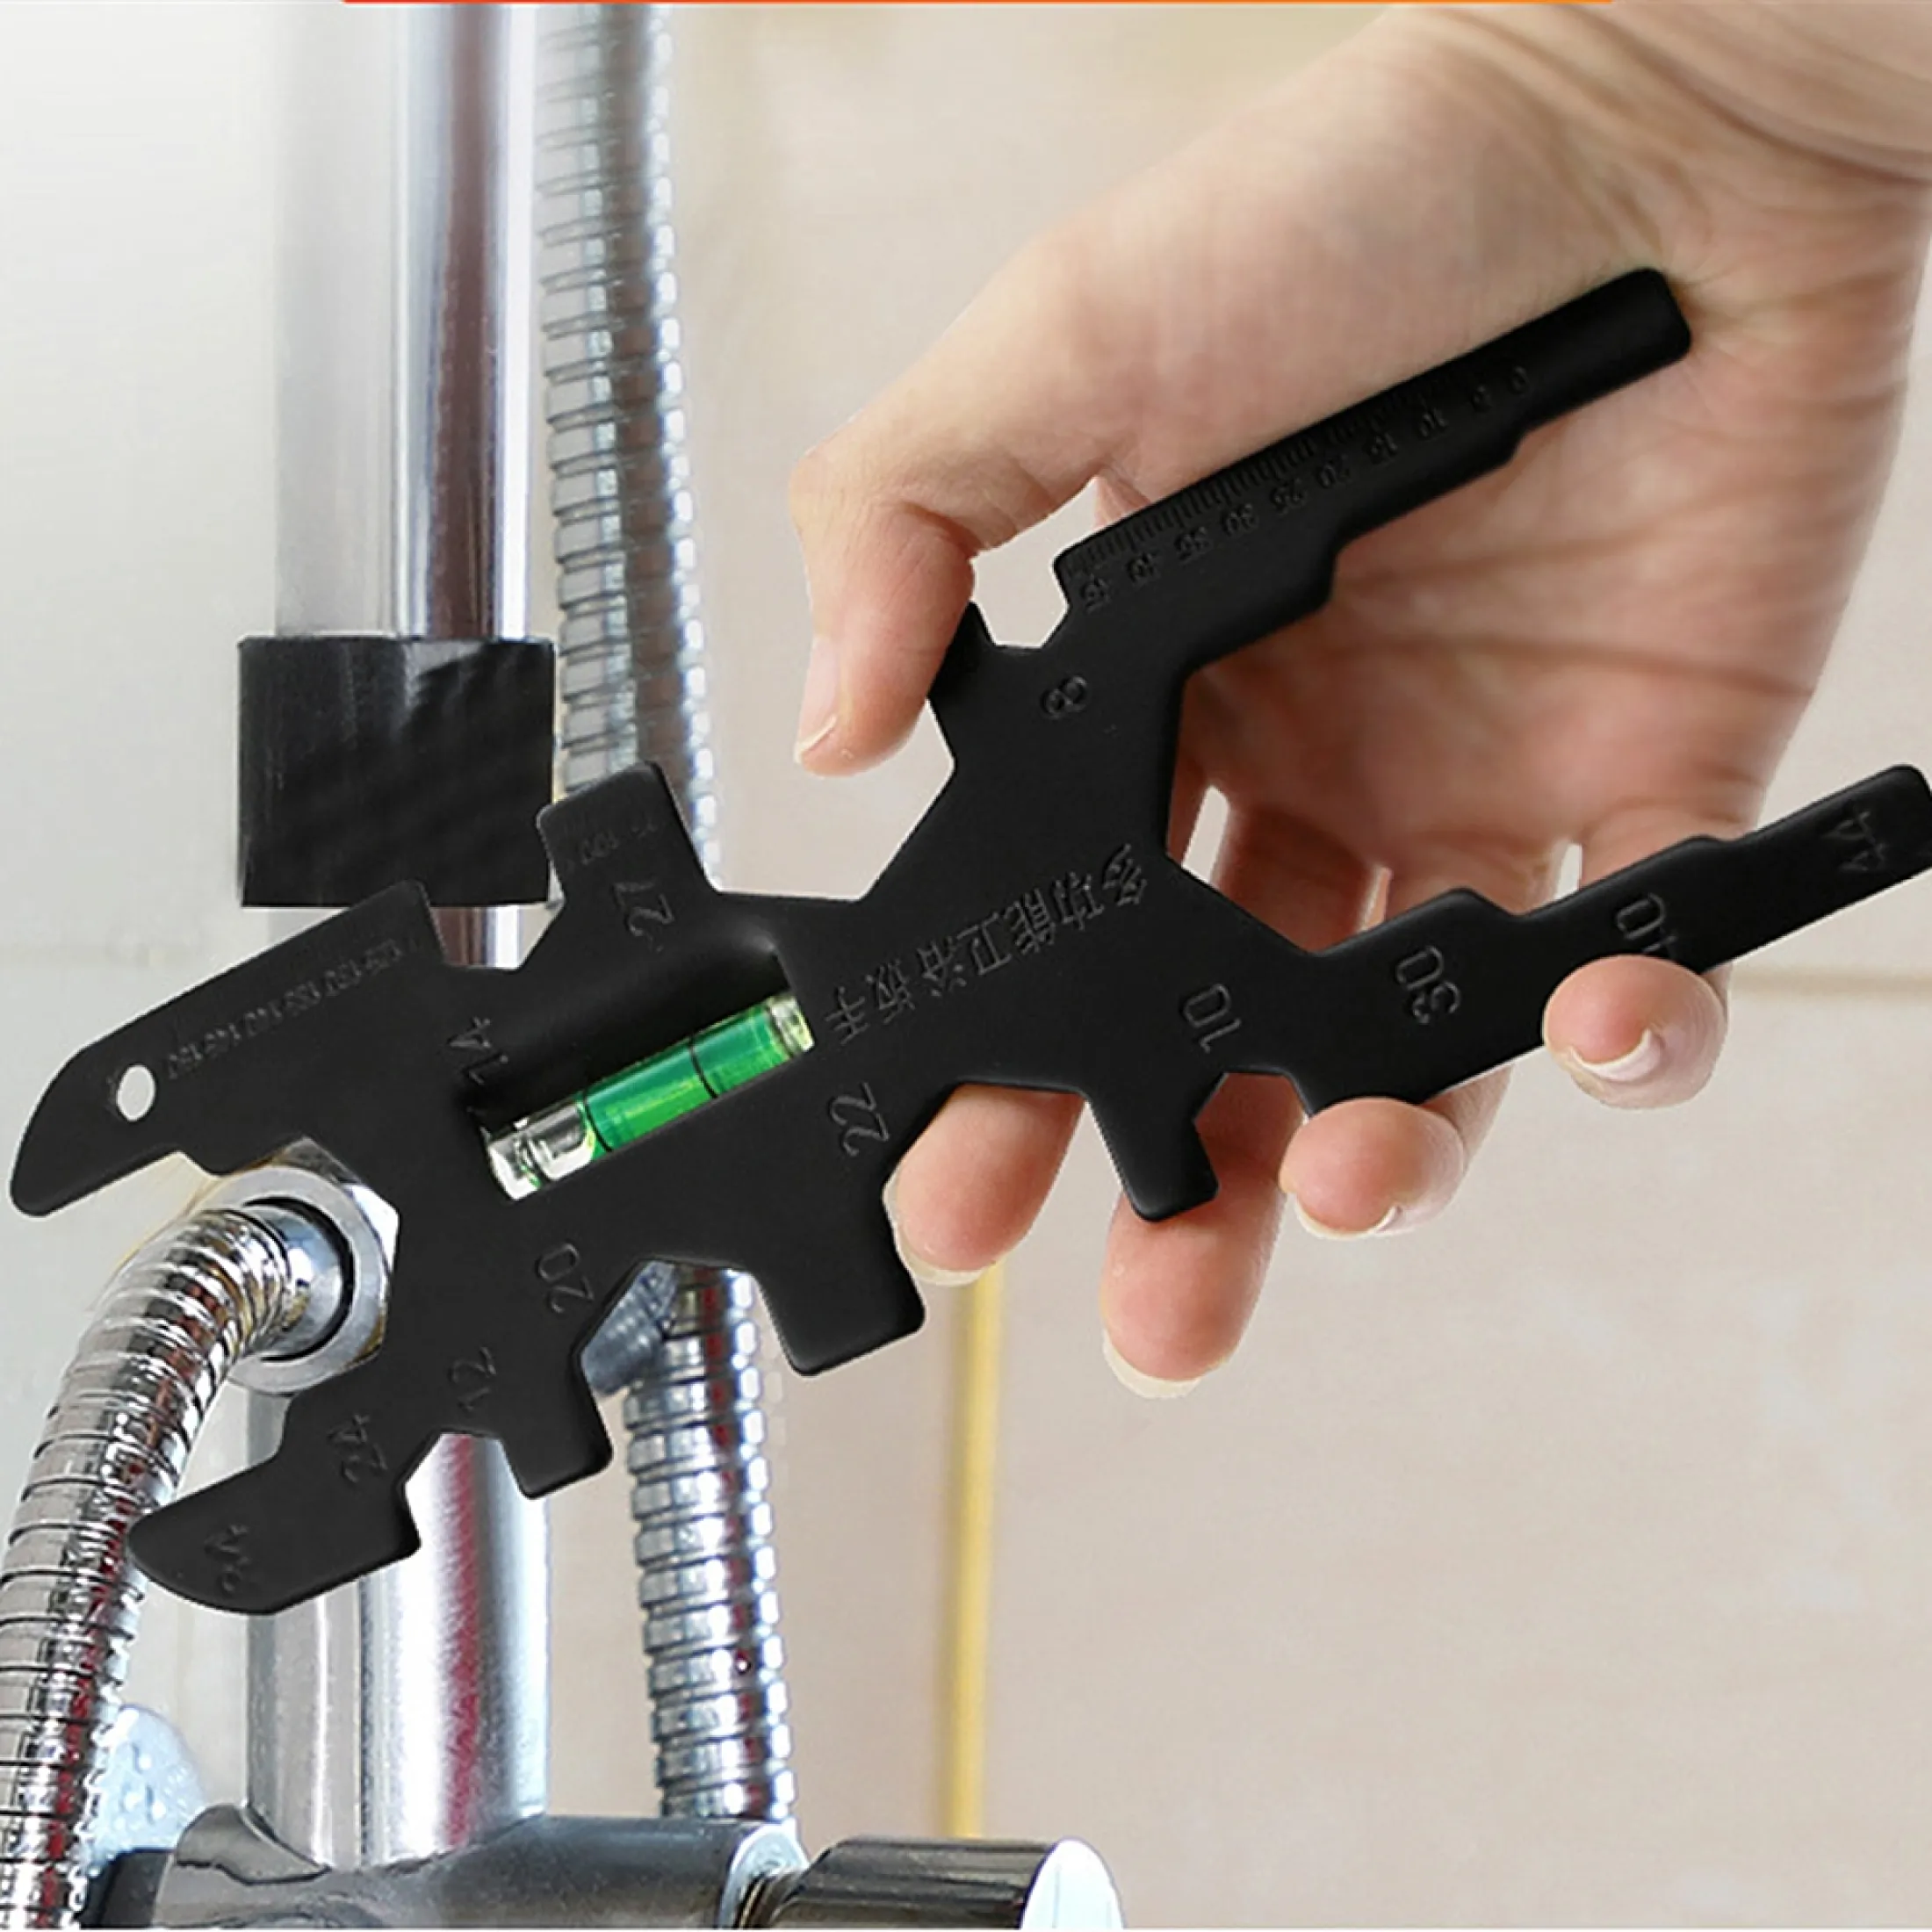 Faucet Wrench Adjustable Faucet Sink Installation Repair Tool Multifunction Tap Backnut Spanner Basin Wrench Plumbing Tools For Bathroom Kitchen Toilet Bowl Sink Faucet And Bottle Opening